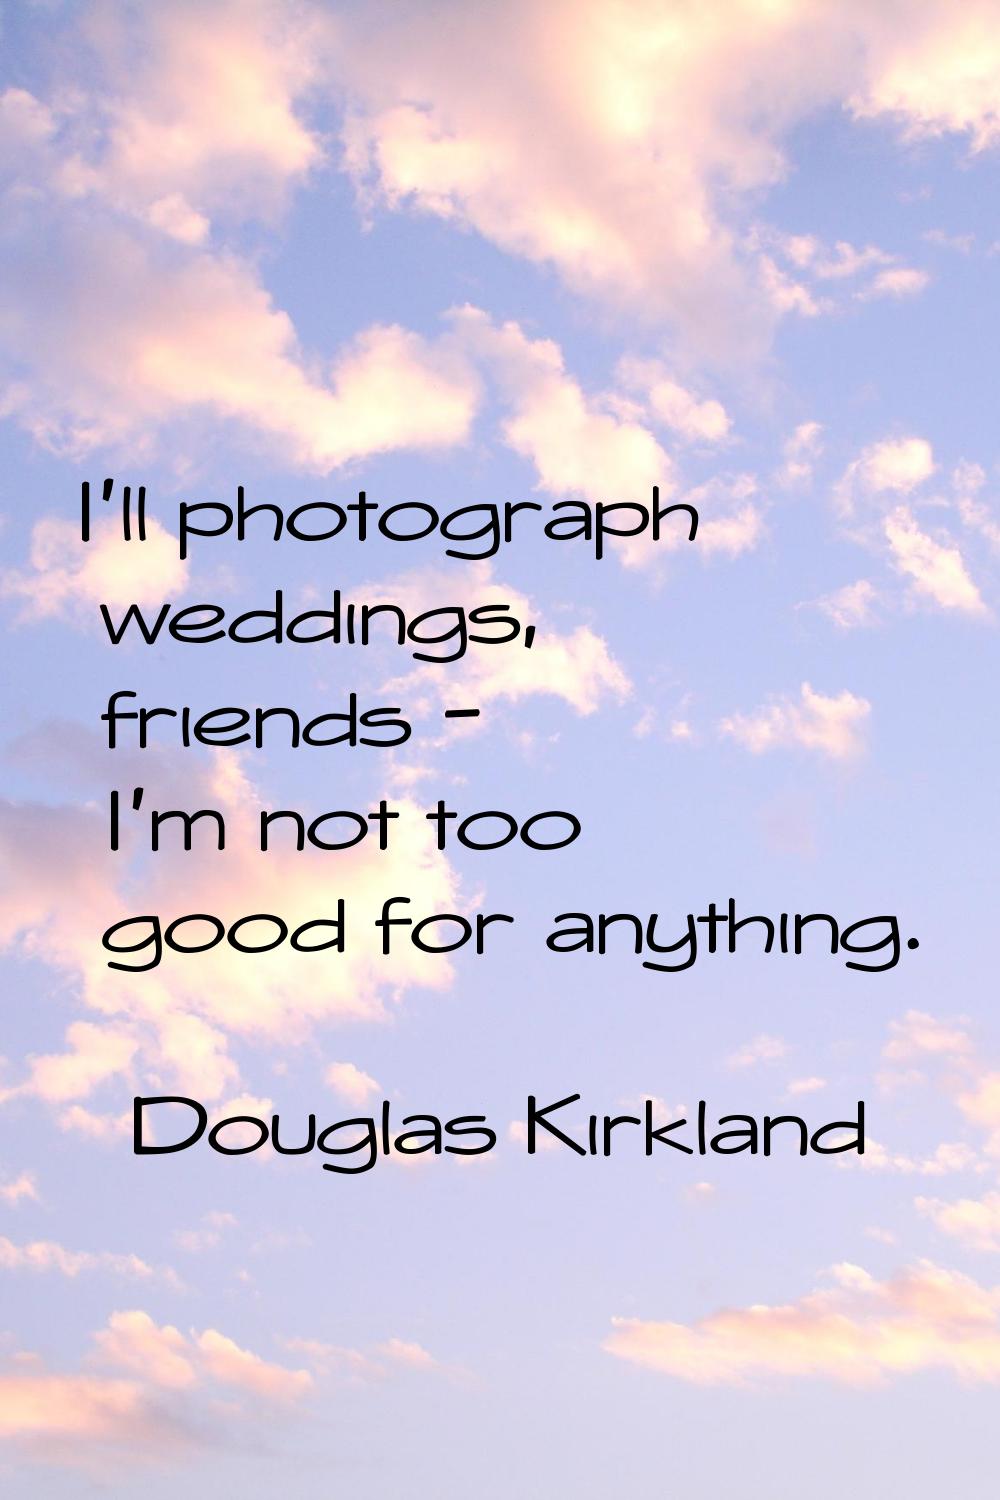 I'll photograph weddings, friends - I'm not too good for anything.